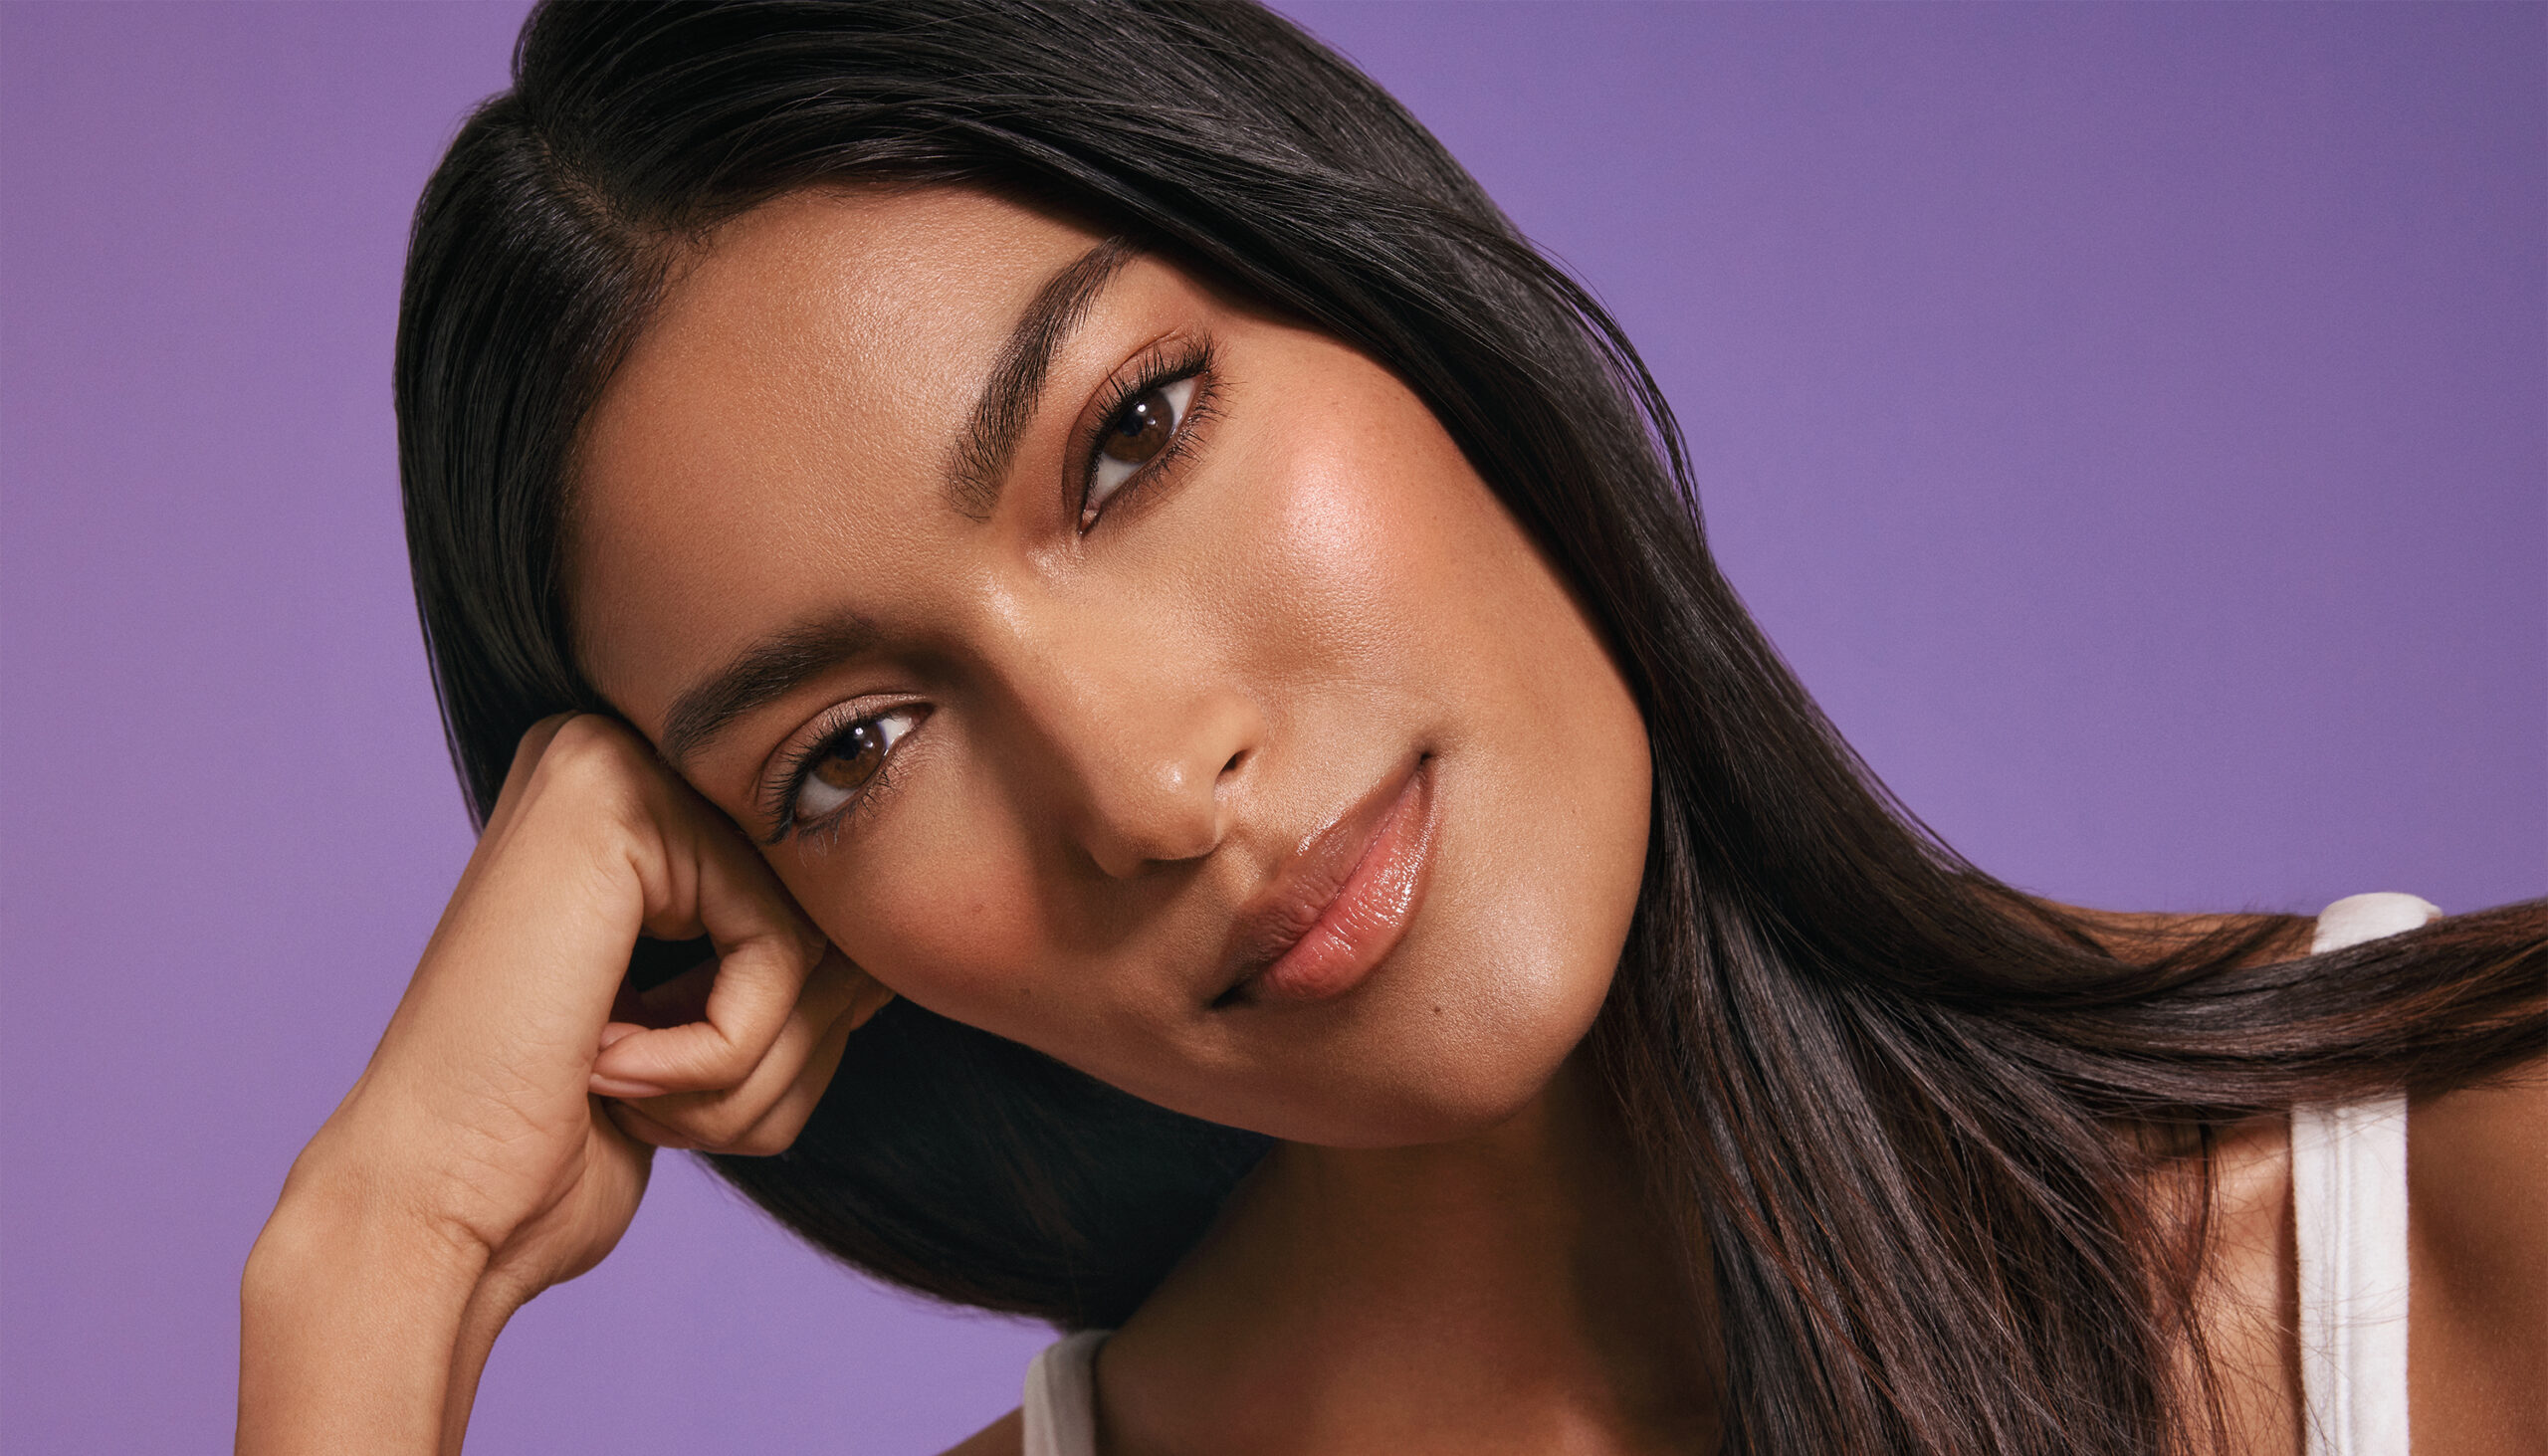 With Prakti Beauty, Model Pritika Swarup Is Infusing Her Indian Heritage  and Philanthropic Values Into Skin Care - Fashionista